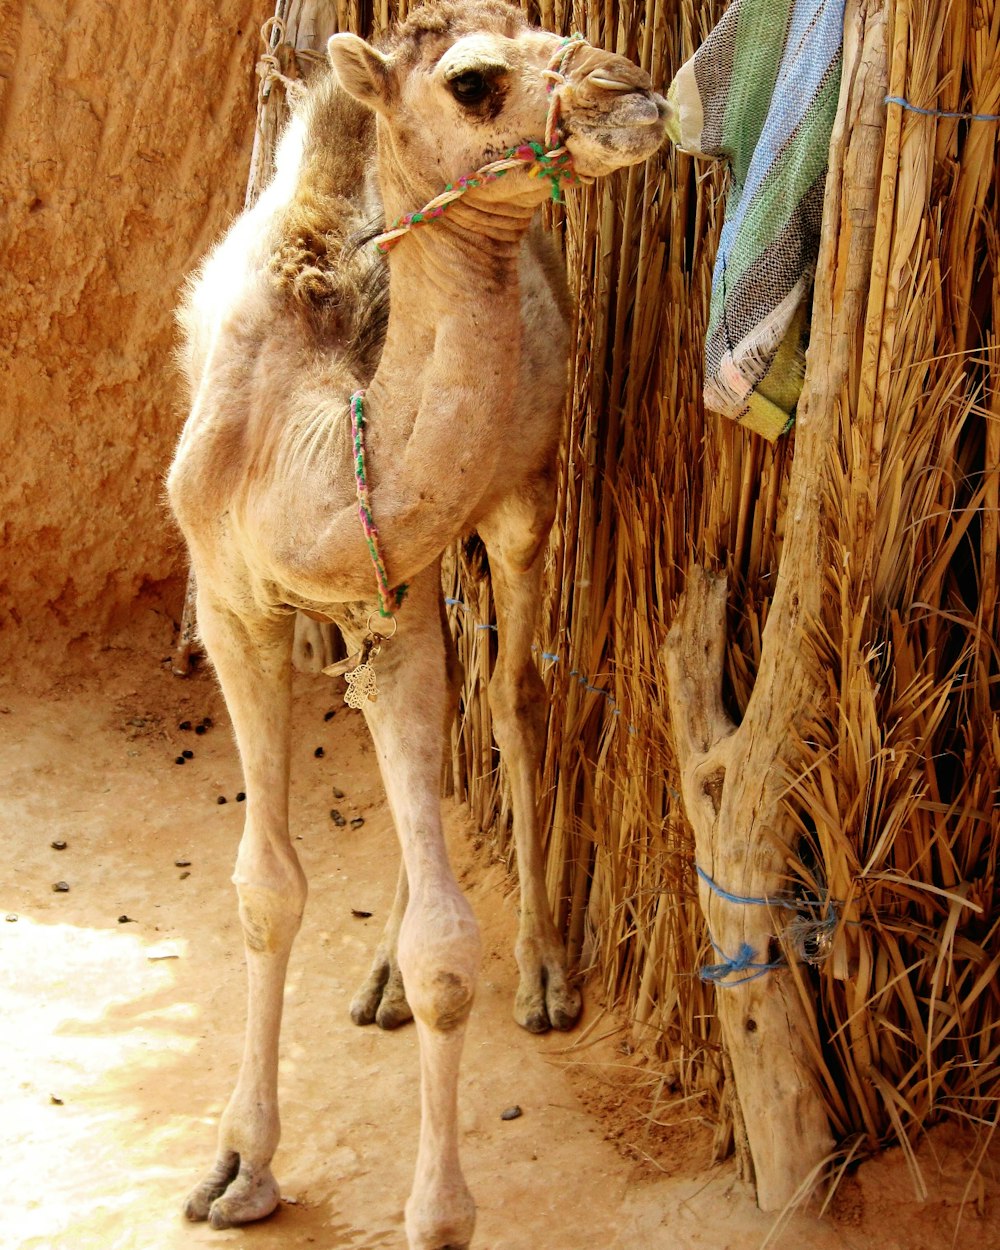 a camel standing next to a pile of straw